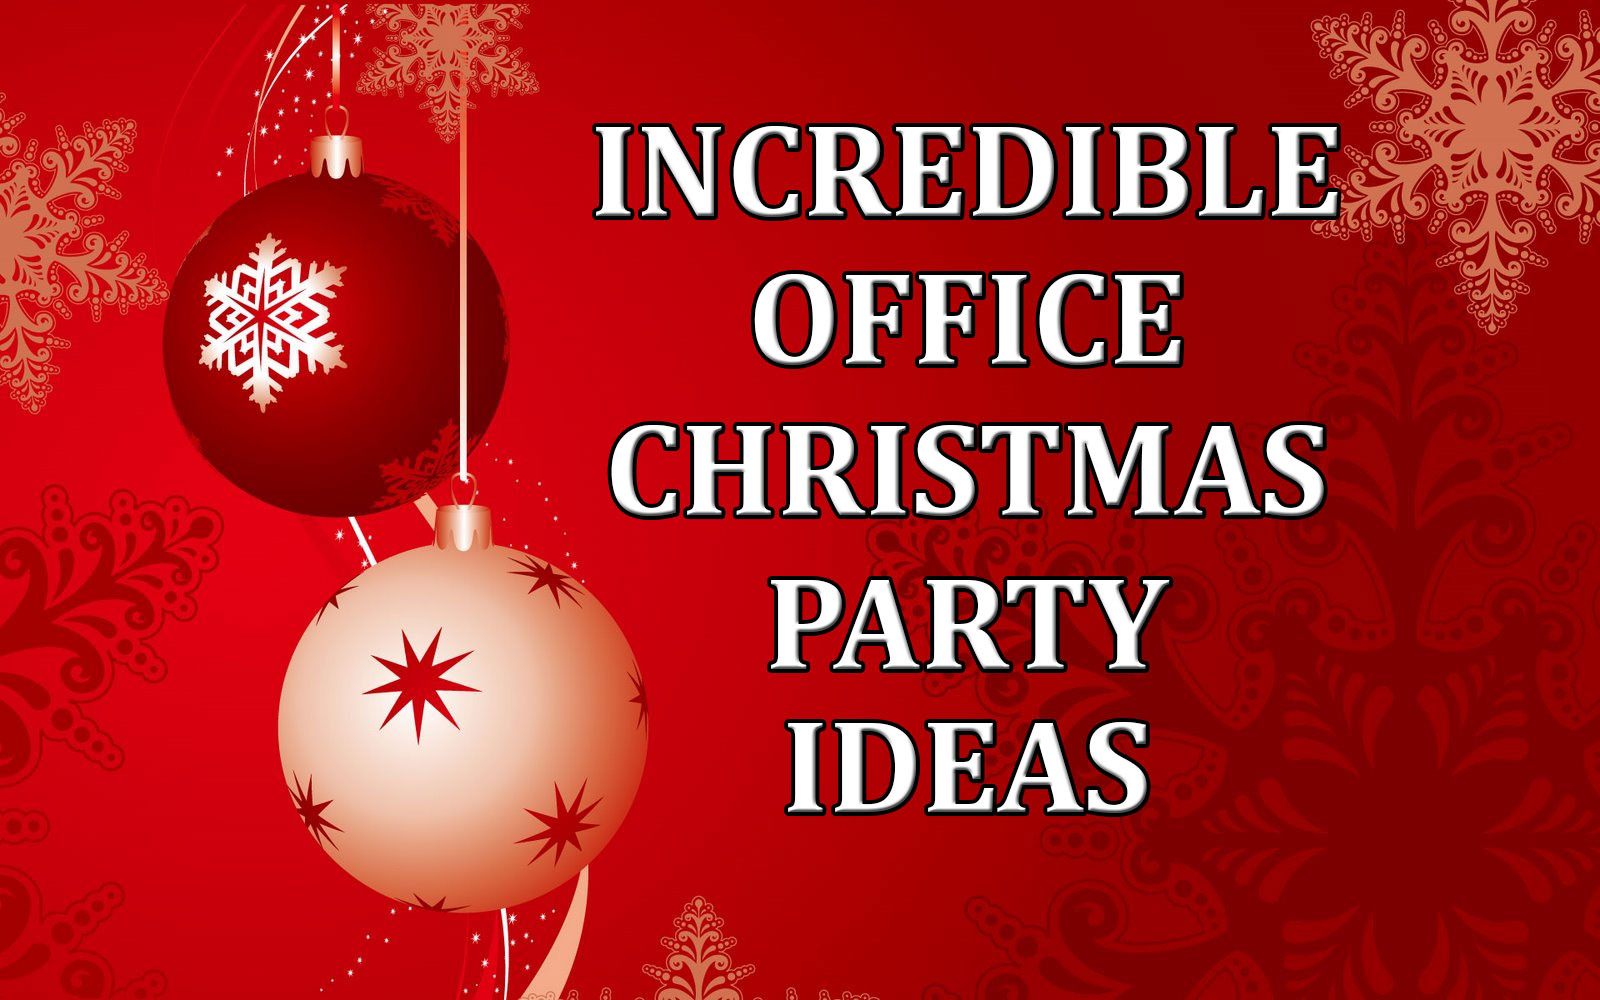 Staff Holiday Party Ideas
 Incredible fice Christmas Party Ideas edy Ventriloquist